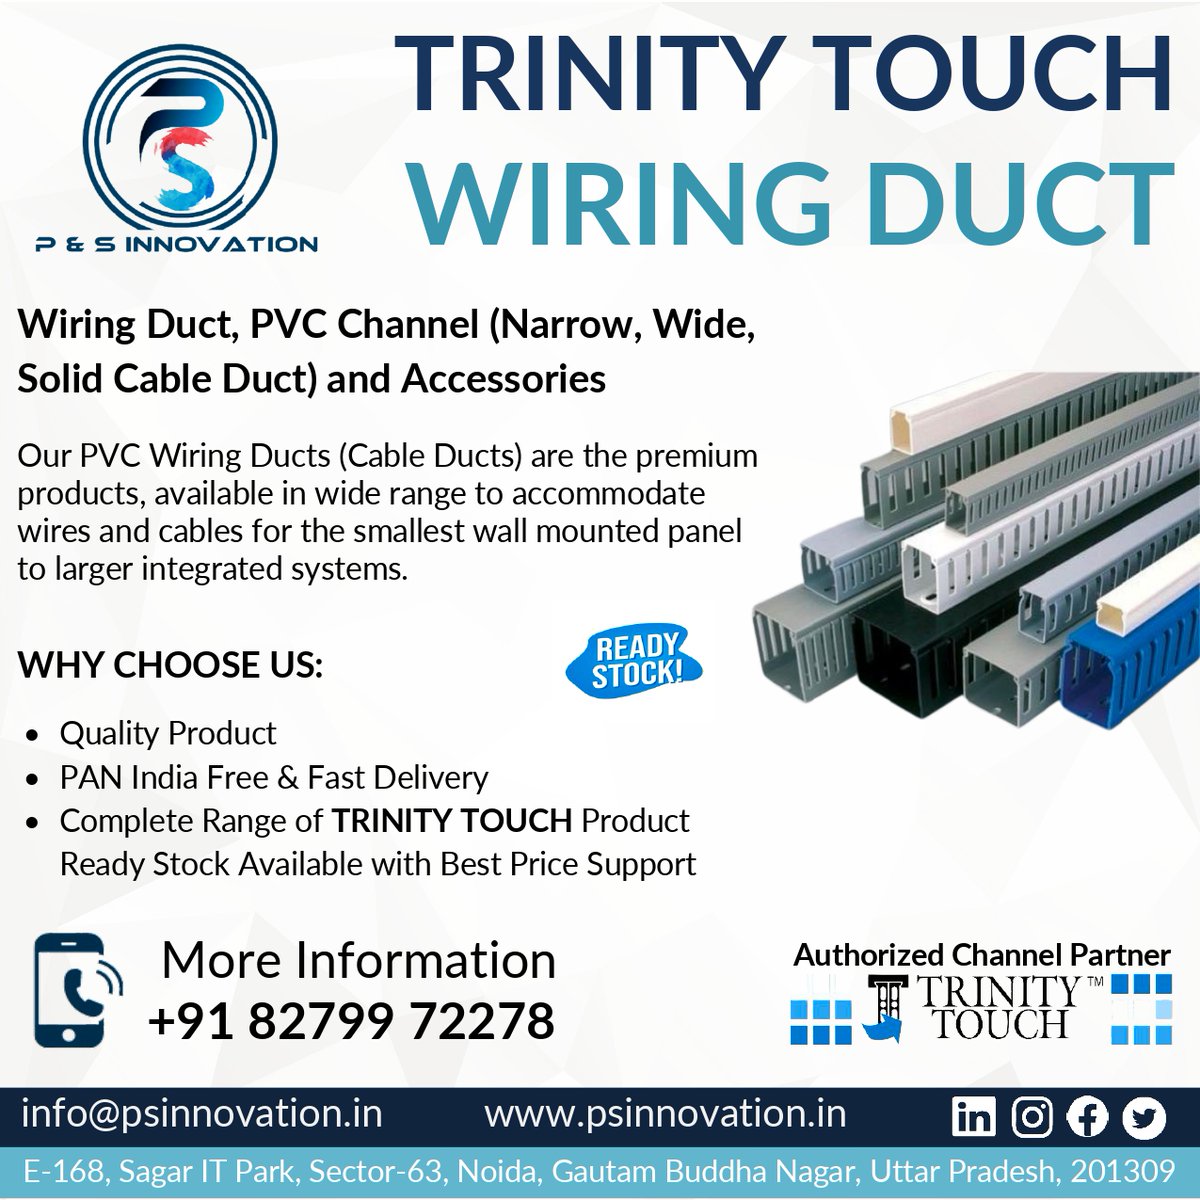 For More Information WhatsApp us on
wa.me/919821440617

#automation #industrialautomation #trinitytouch #ttpl #wiringduct #cableducts #ducts #pvcducts #trinity